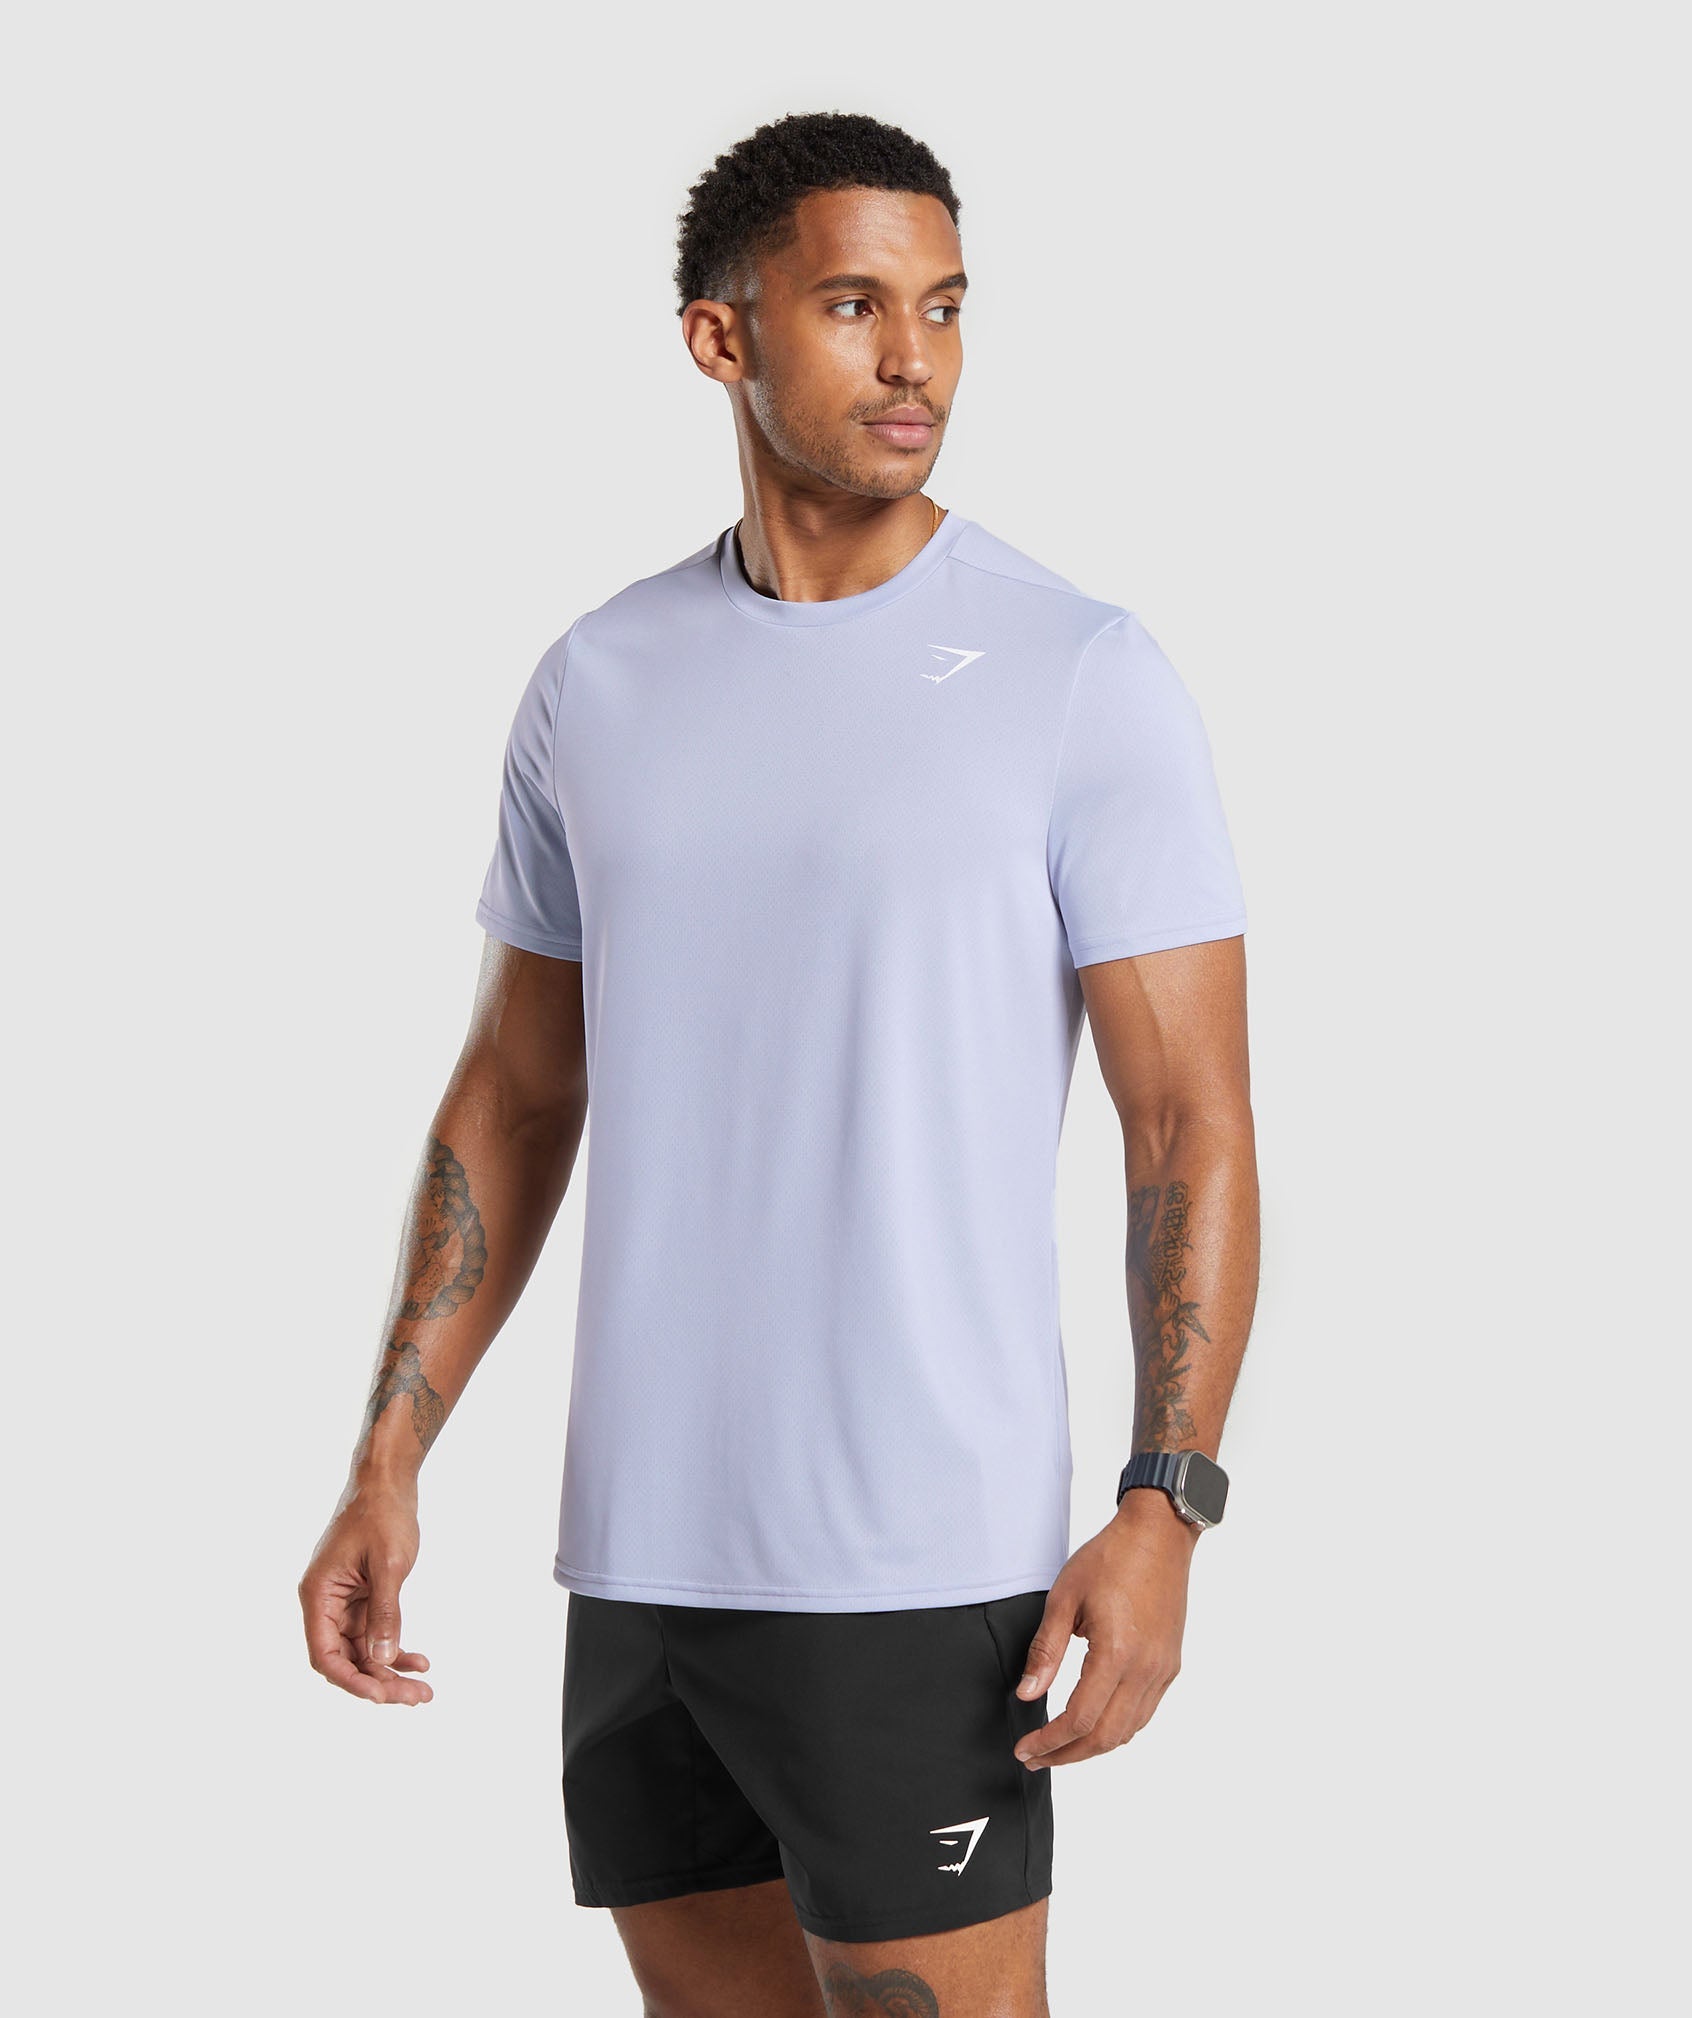 Arrival T-Shirt in Silver Lilac - view 3